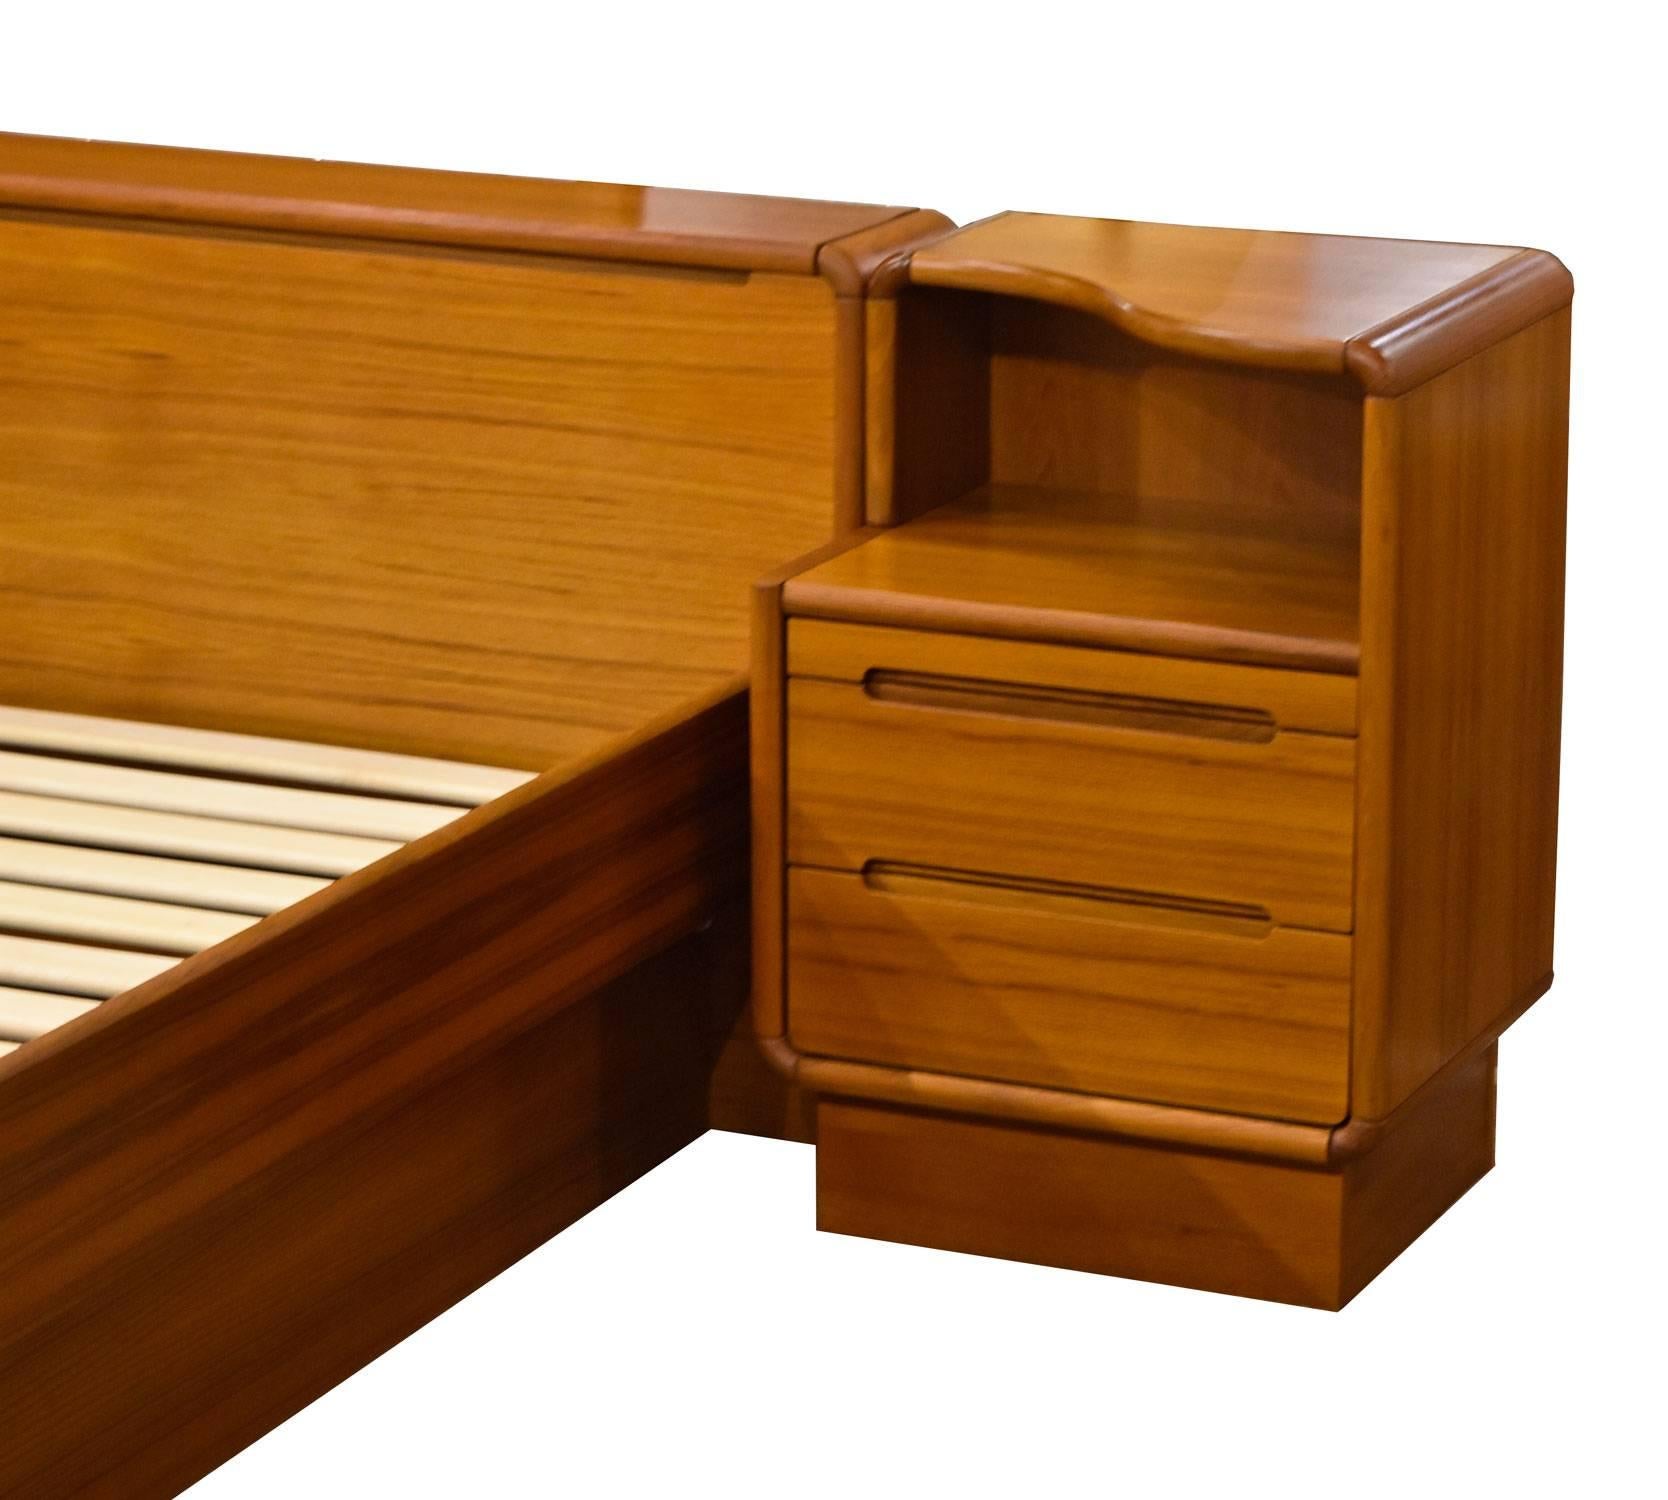 Pre-owned king-size teak platform bed by Sun Cabinet Furniture. The bed comes complete as pictured and includes the two matching nightstands. Danish modern design, made in Thailand. Space saving features include storage compartments in the headboard